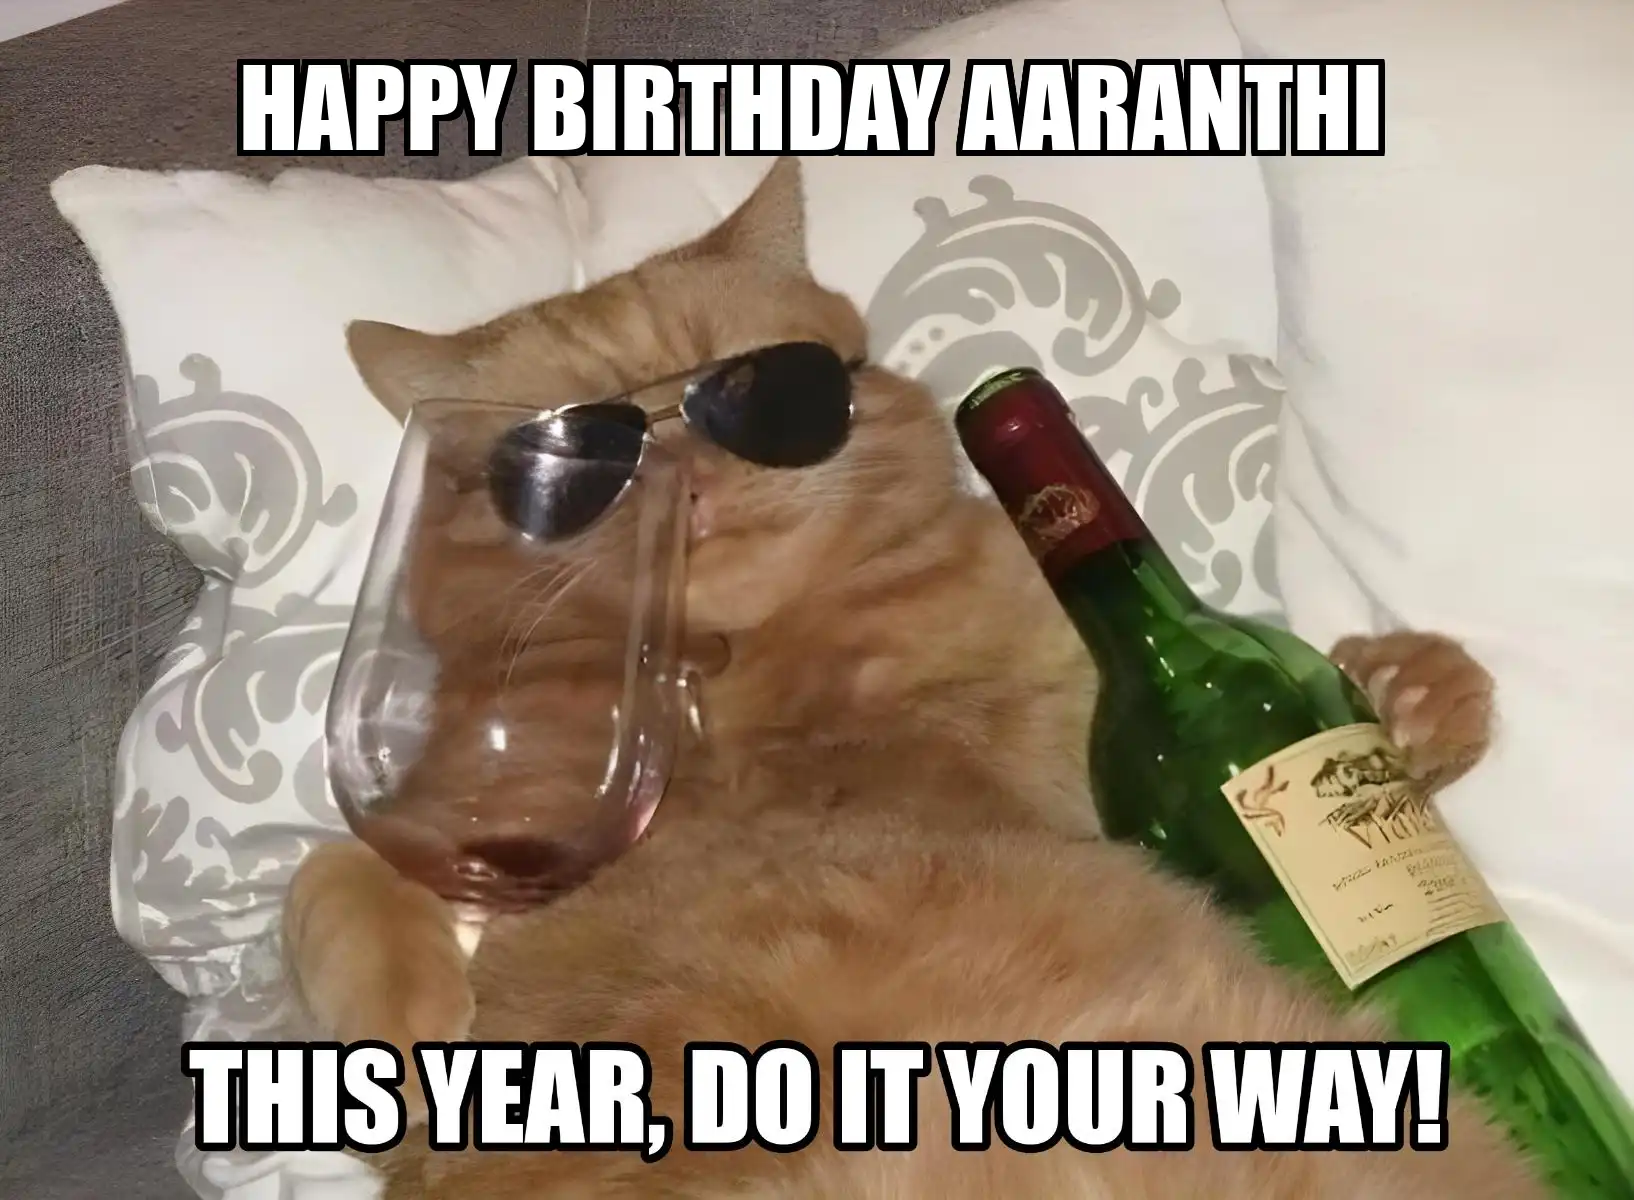 Happy Birthday Aaranthi This Year Do It Your Way Meme